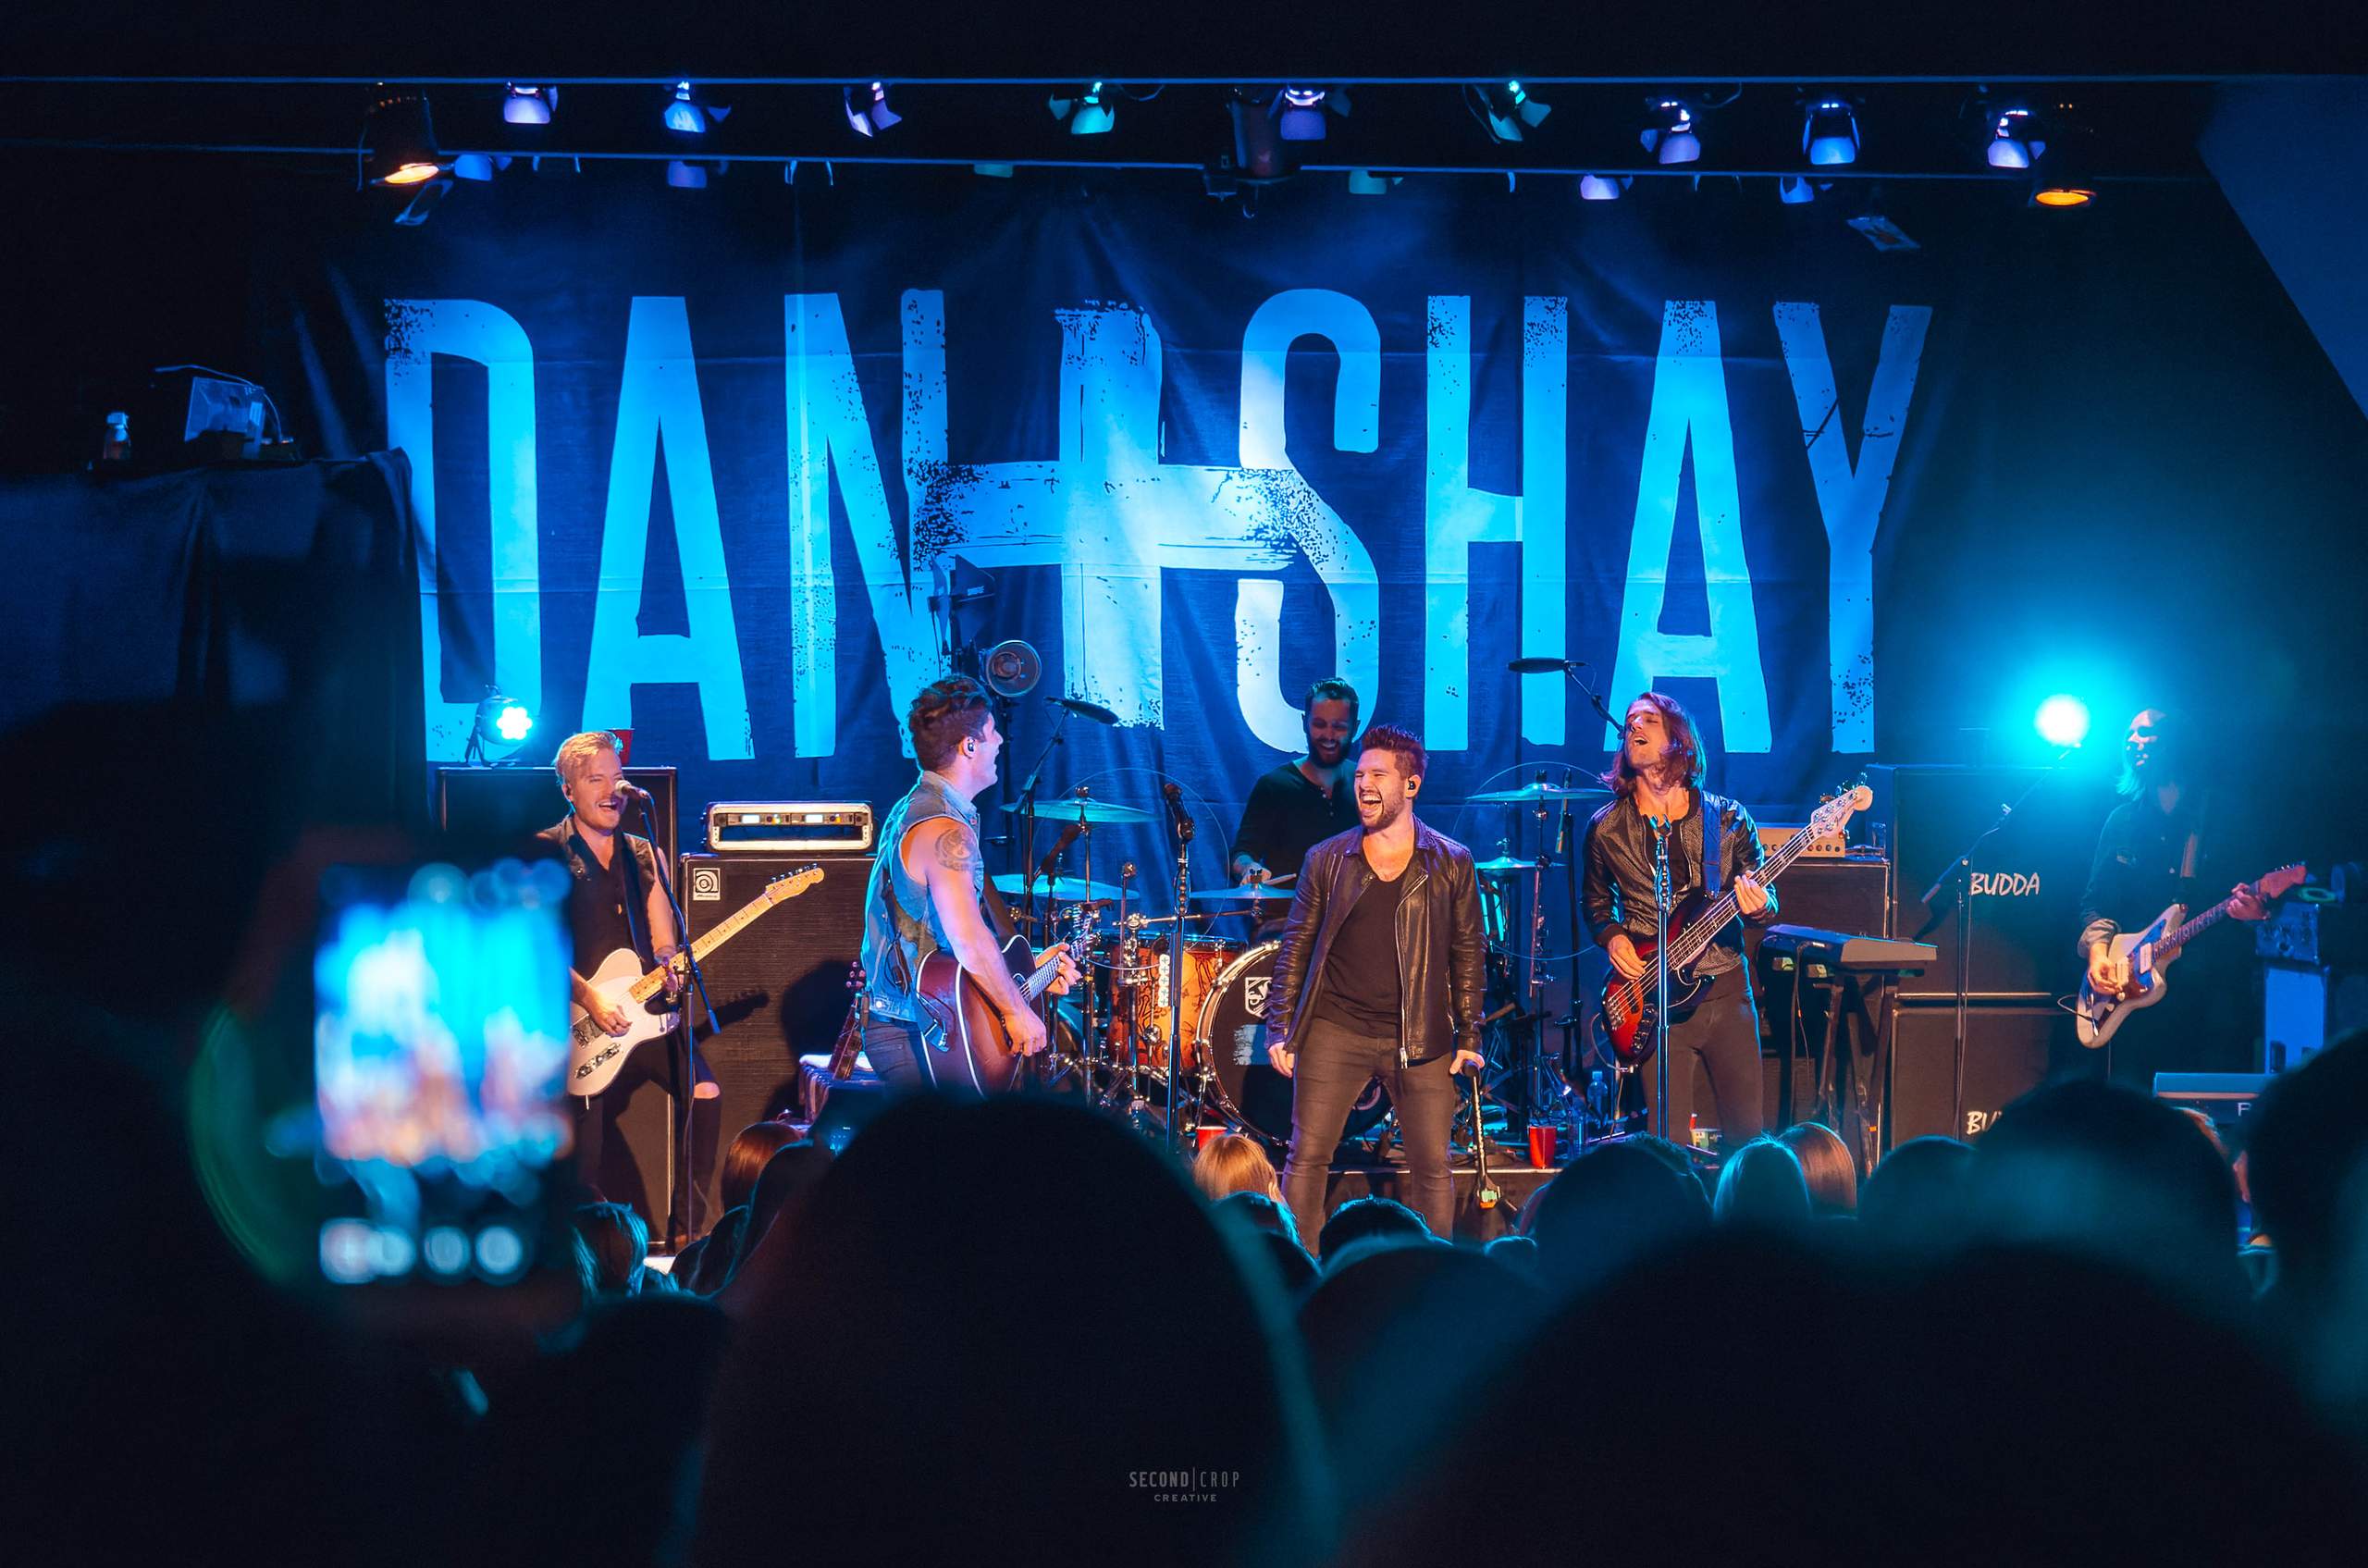 Dan & Shay performing at The Majestic in Madison, WI on October 10th, 2014, photography by Ross Harried for Second Crop Music